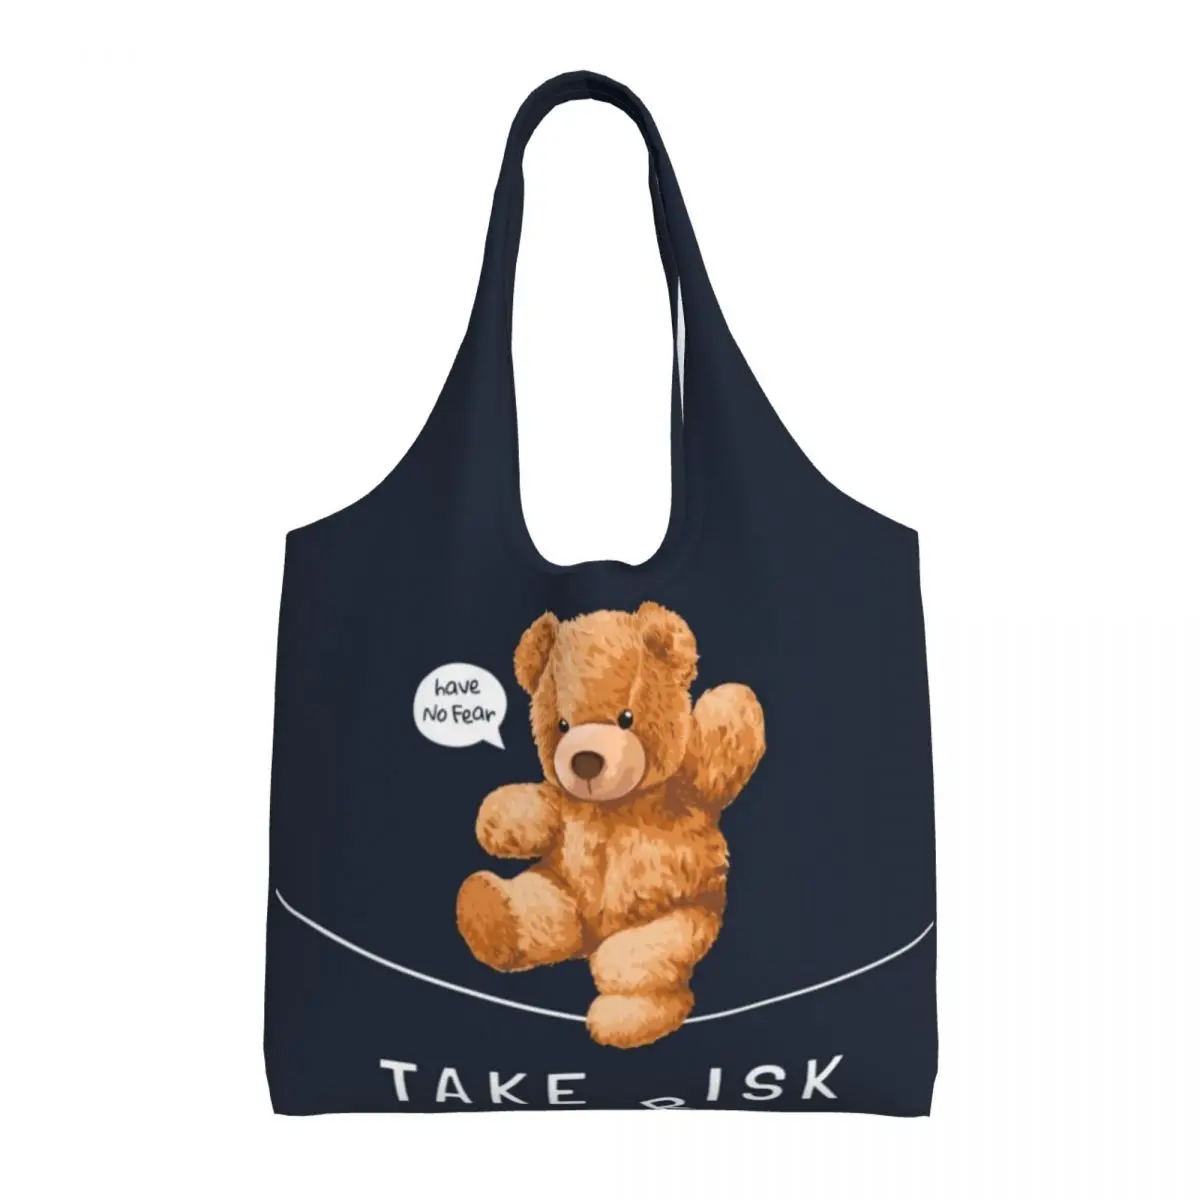 

Bear Toy Walking On String Shopping Bag Have No Fear Take Risk Shopping Female Handbag Gifts Retro Polyester Bags